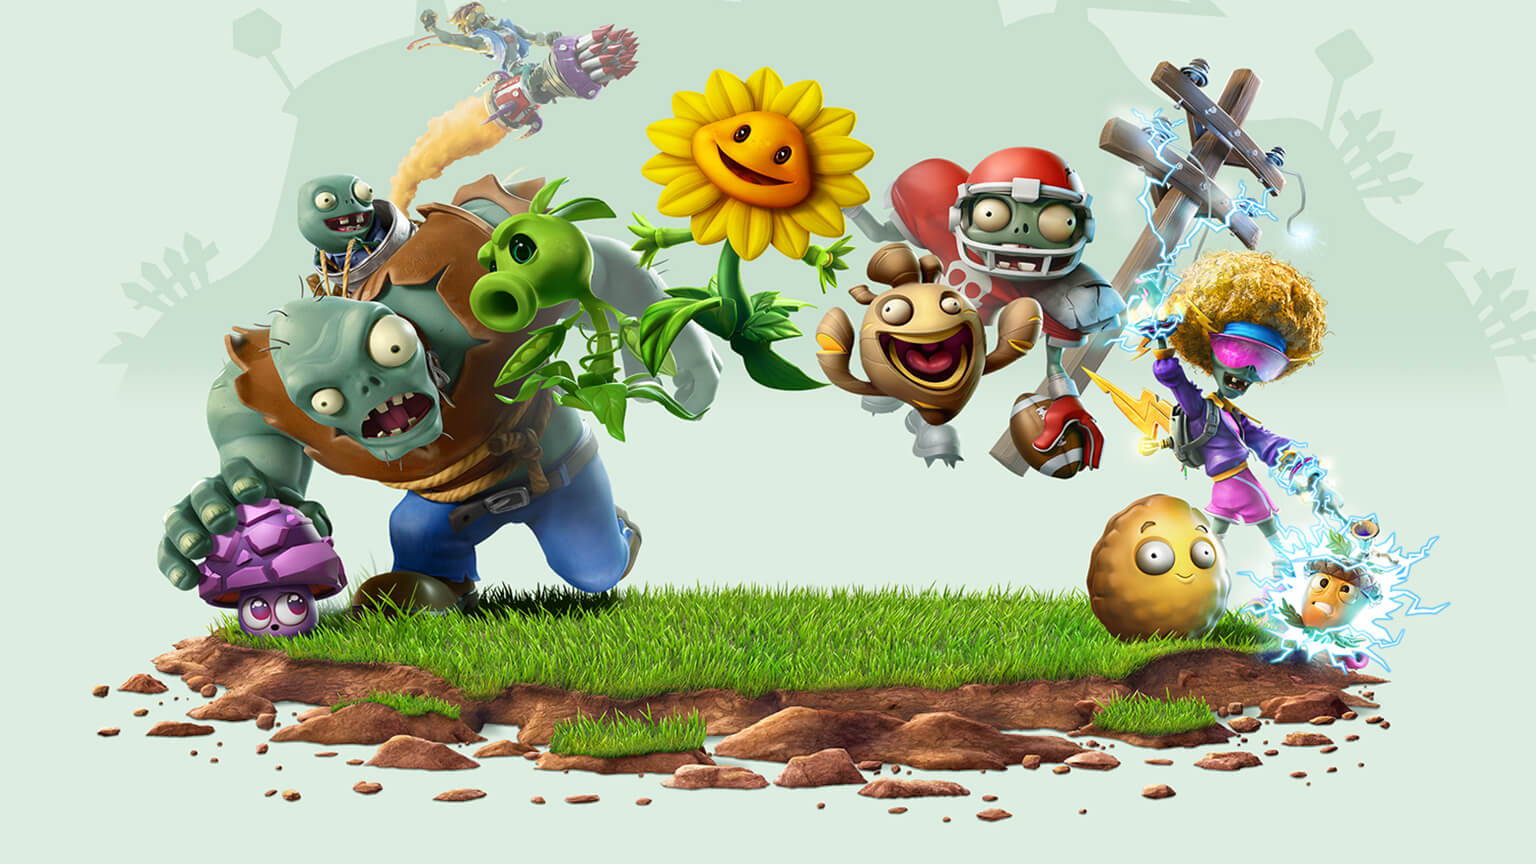 Plants Vs Zombies- Why This Game Is Still Popular 